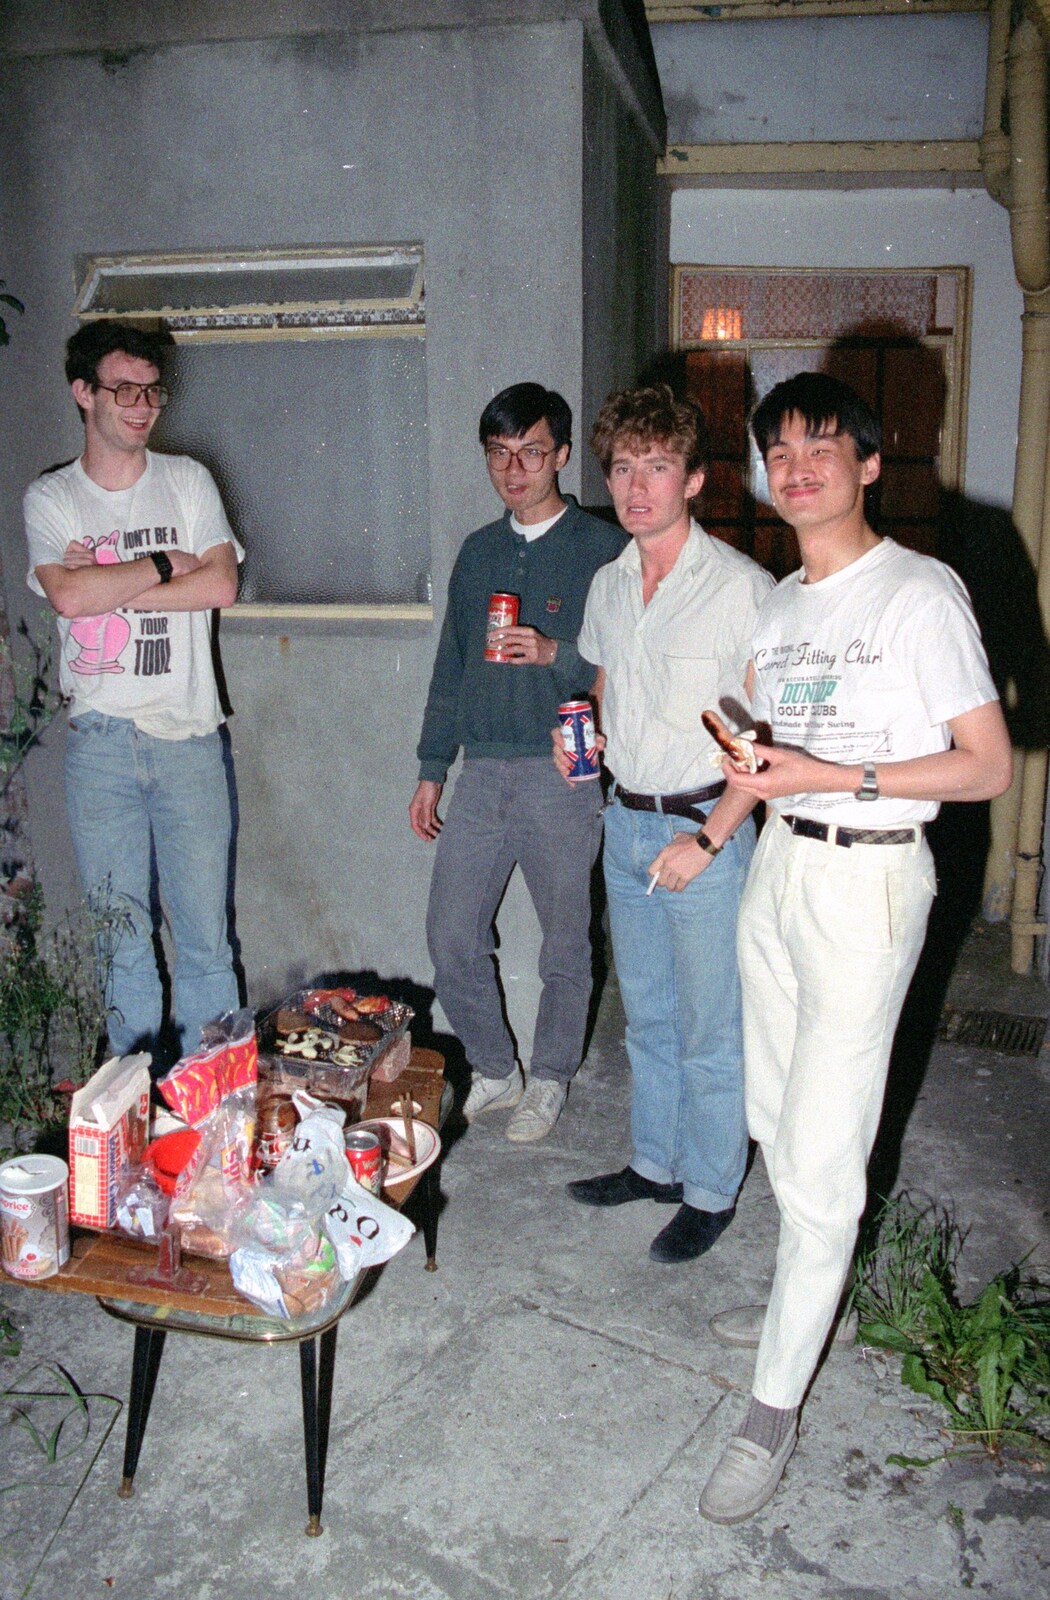 Basement barbeque action from Uni: Risky Business, A Wedding Occurs and Dave Leaves, Wyndham Square, Plymouth - 15th July 1989